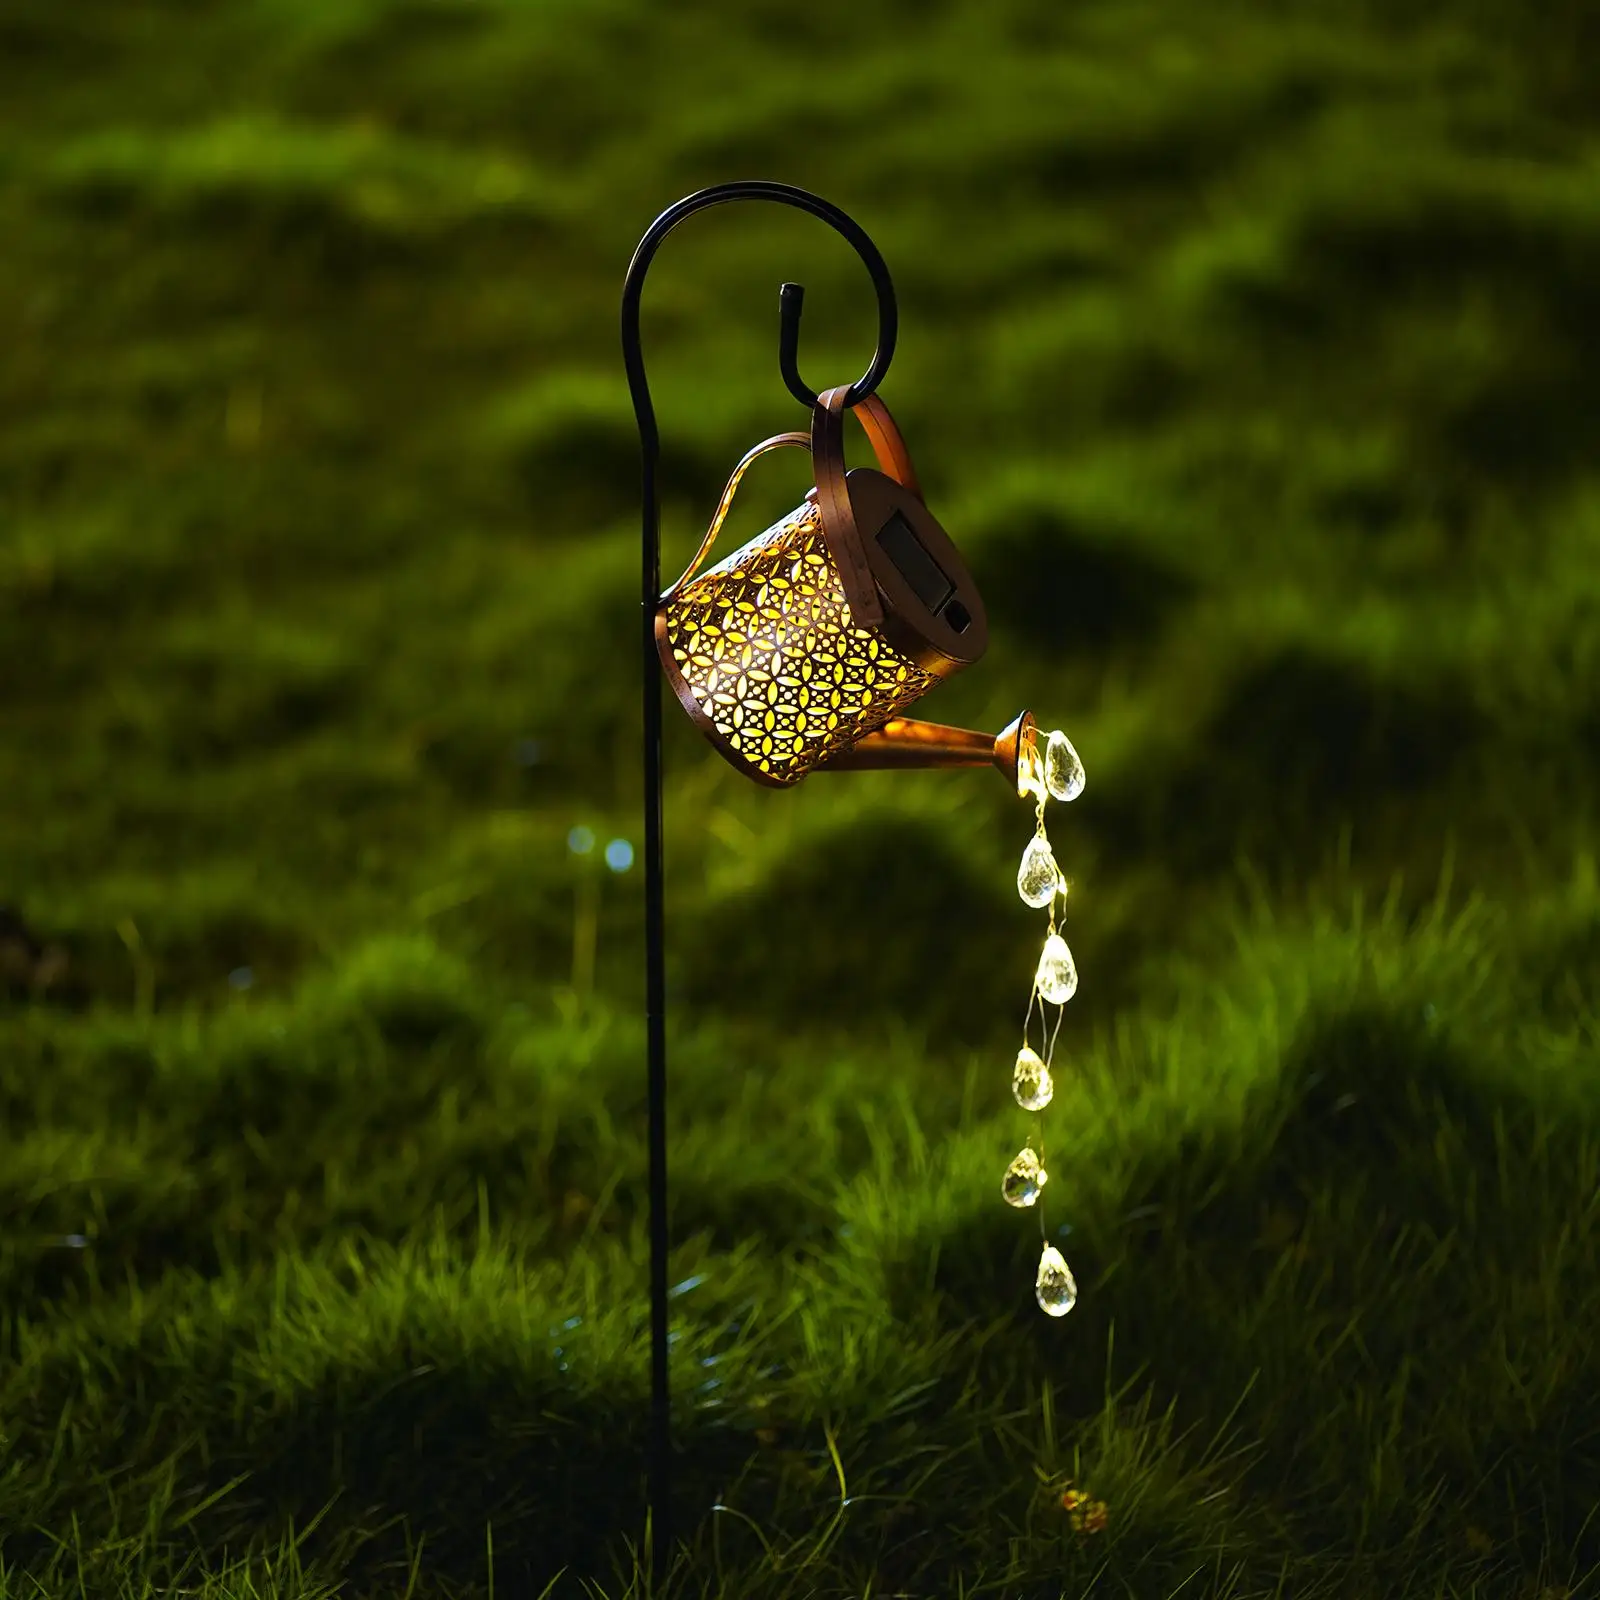 Kettle Lights Decorative Lighting IP65 Waterproof Lawn Lamp Ground Inserting Light for Driveway Yard Landscape Outdoor